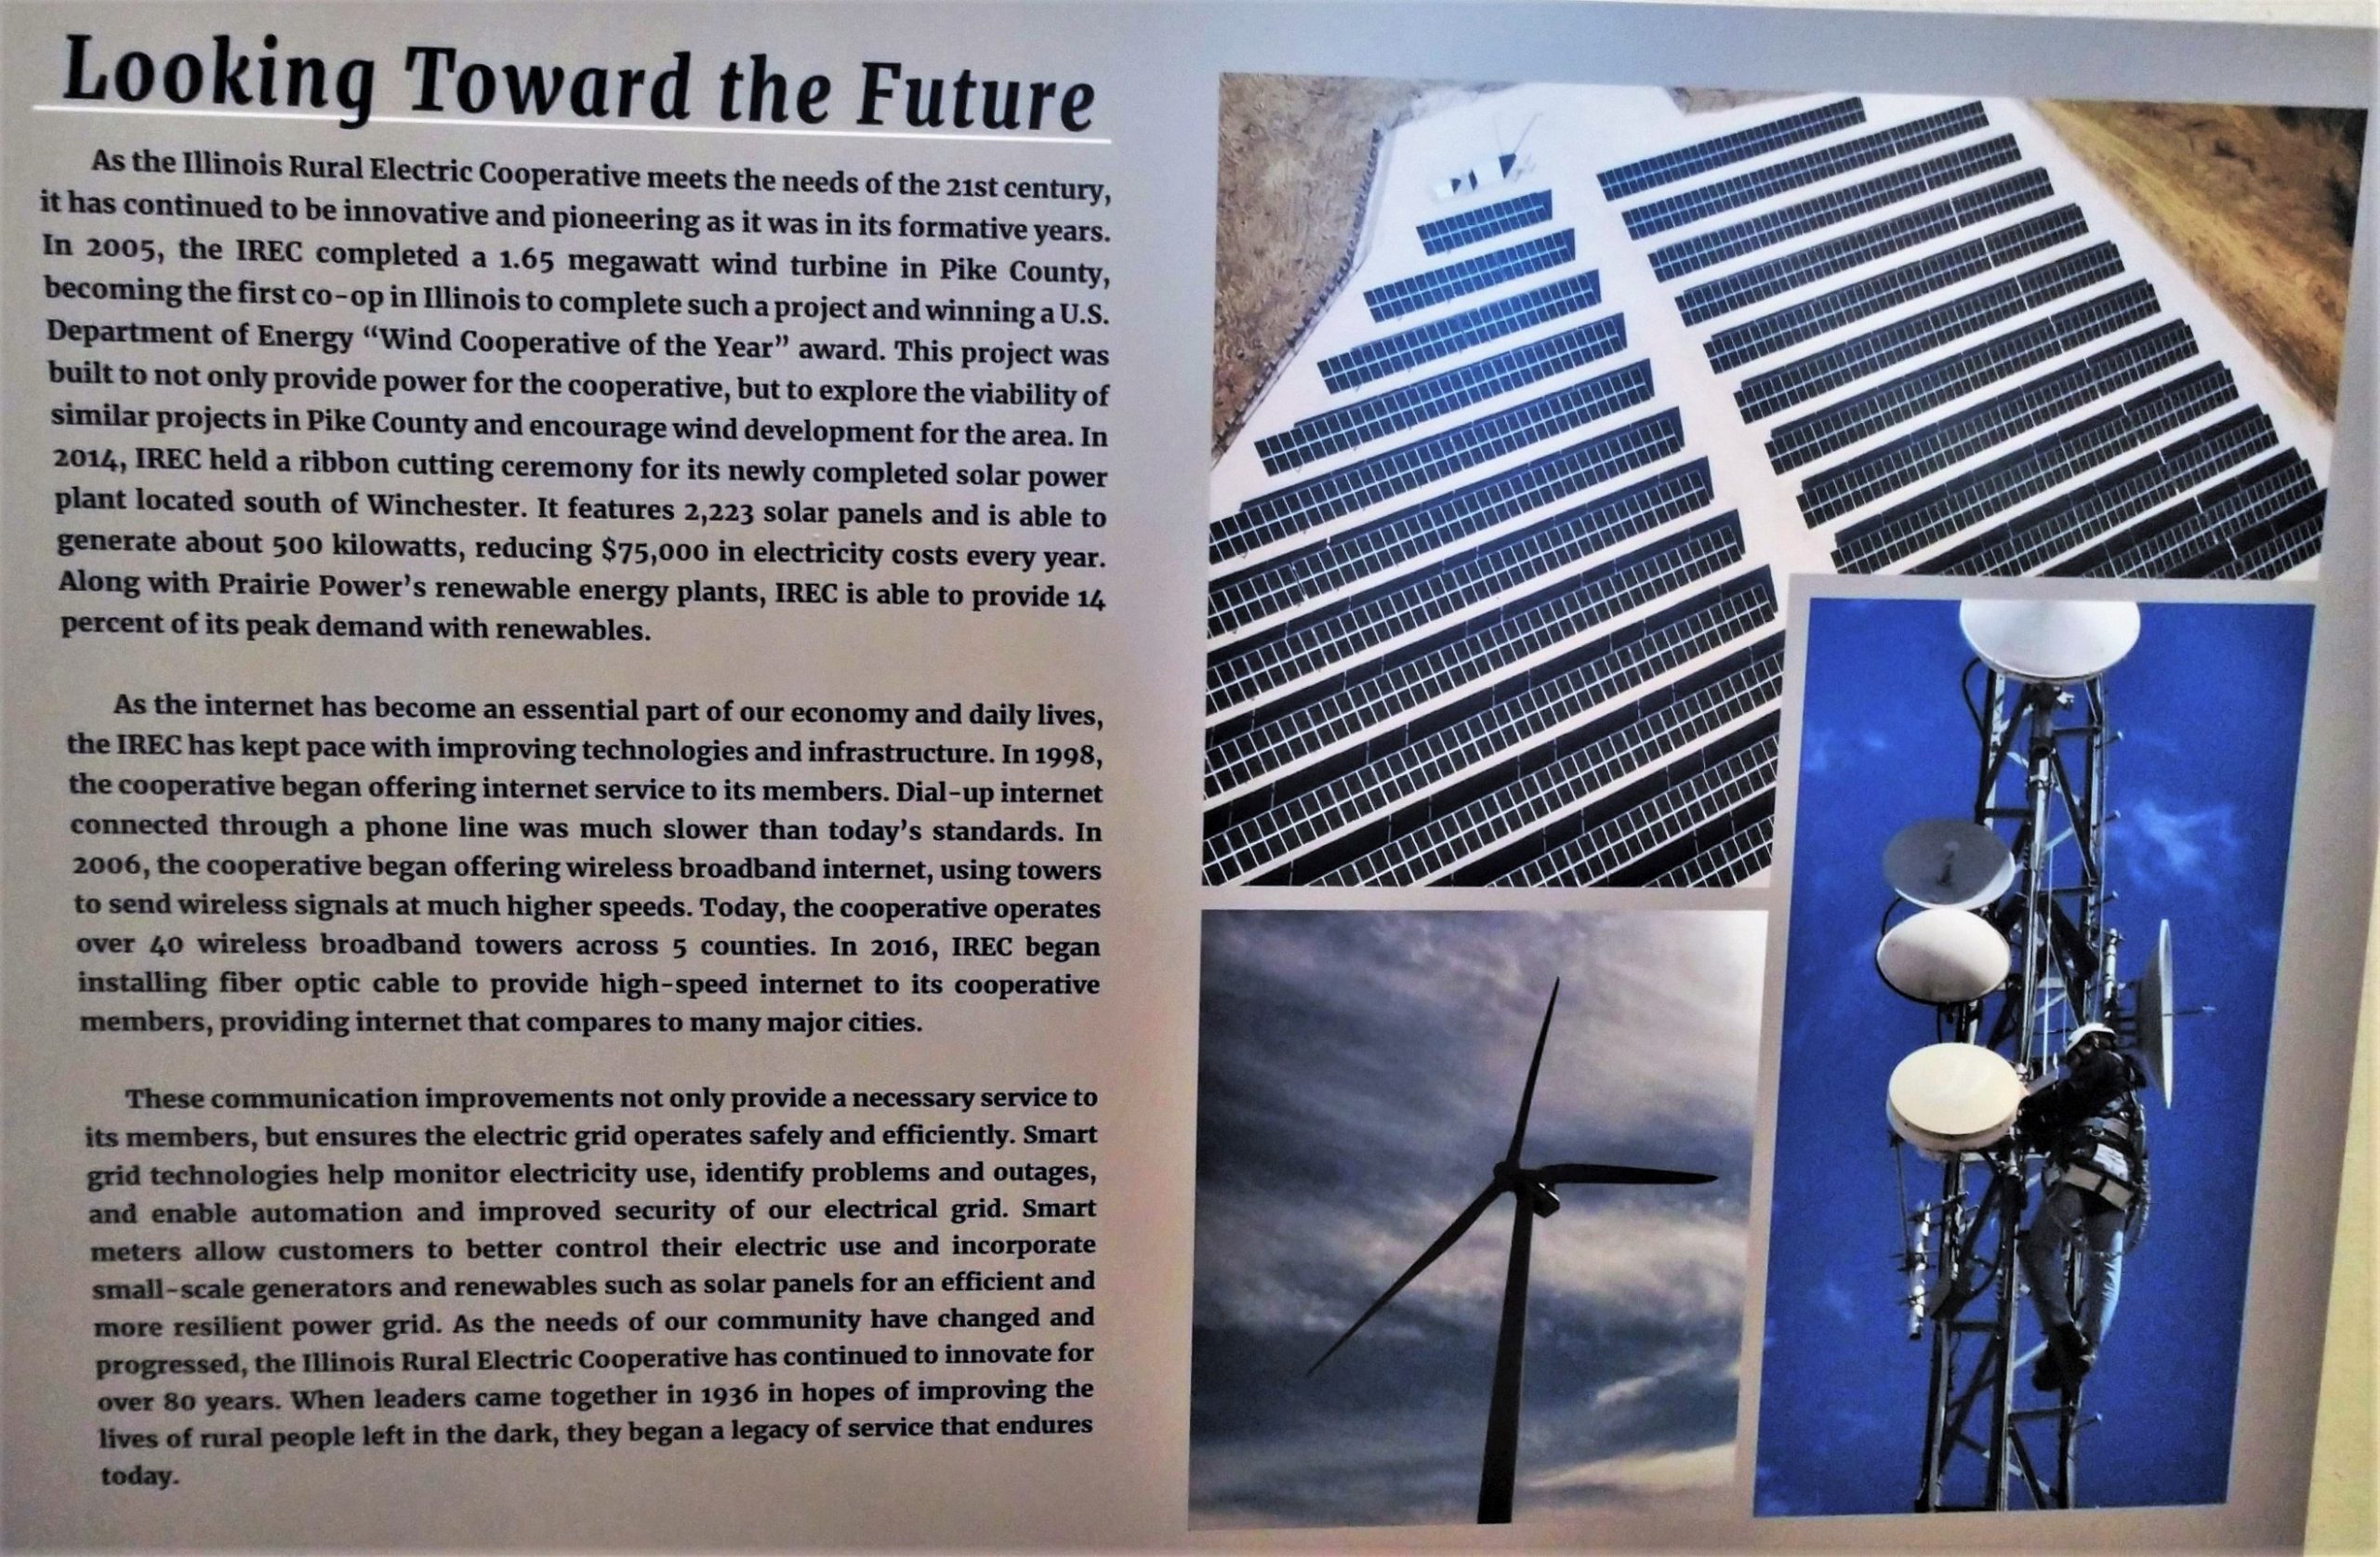 Photograph of a segment of Old School Museum's companion exhibition about Illinois Rural Electric Cooperative's future-mindedness.